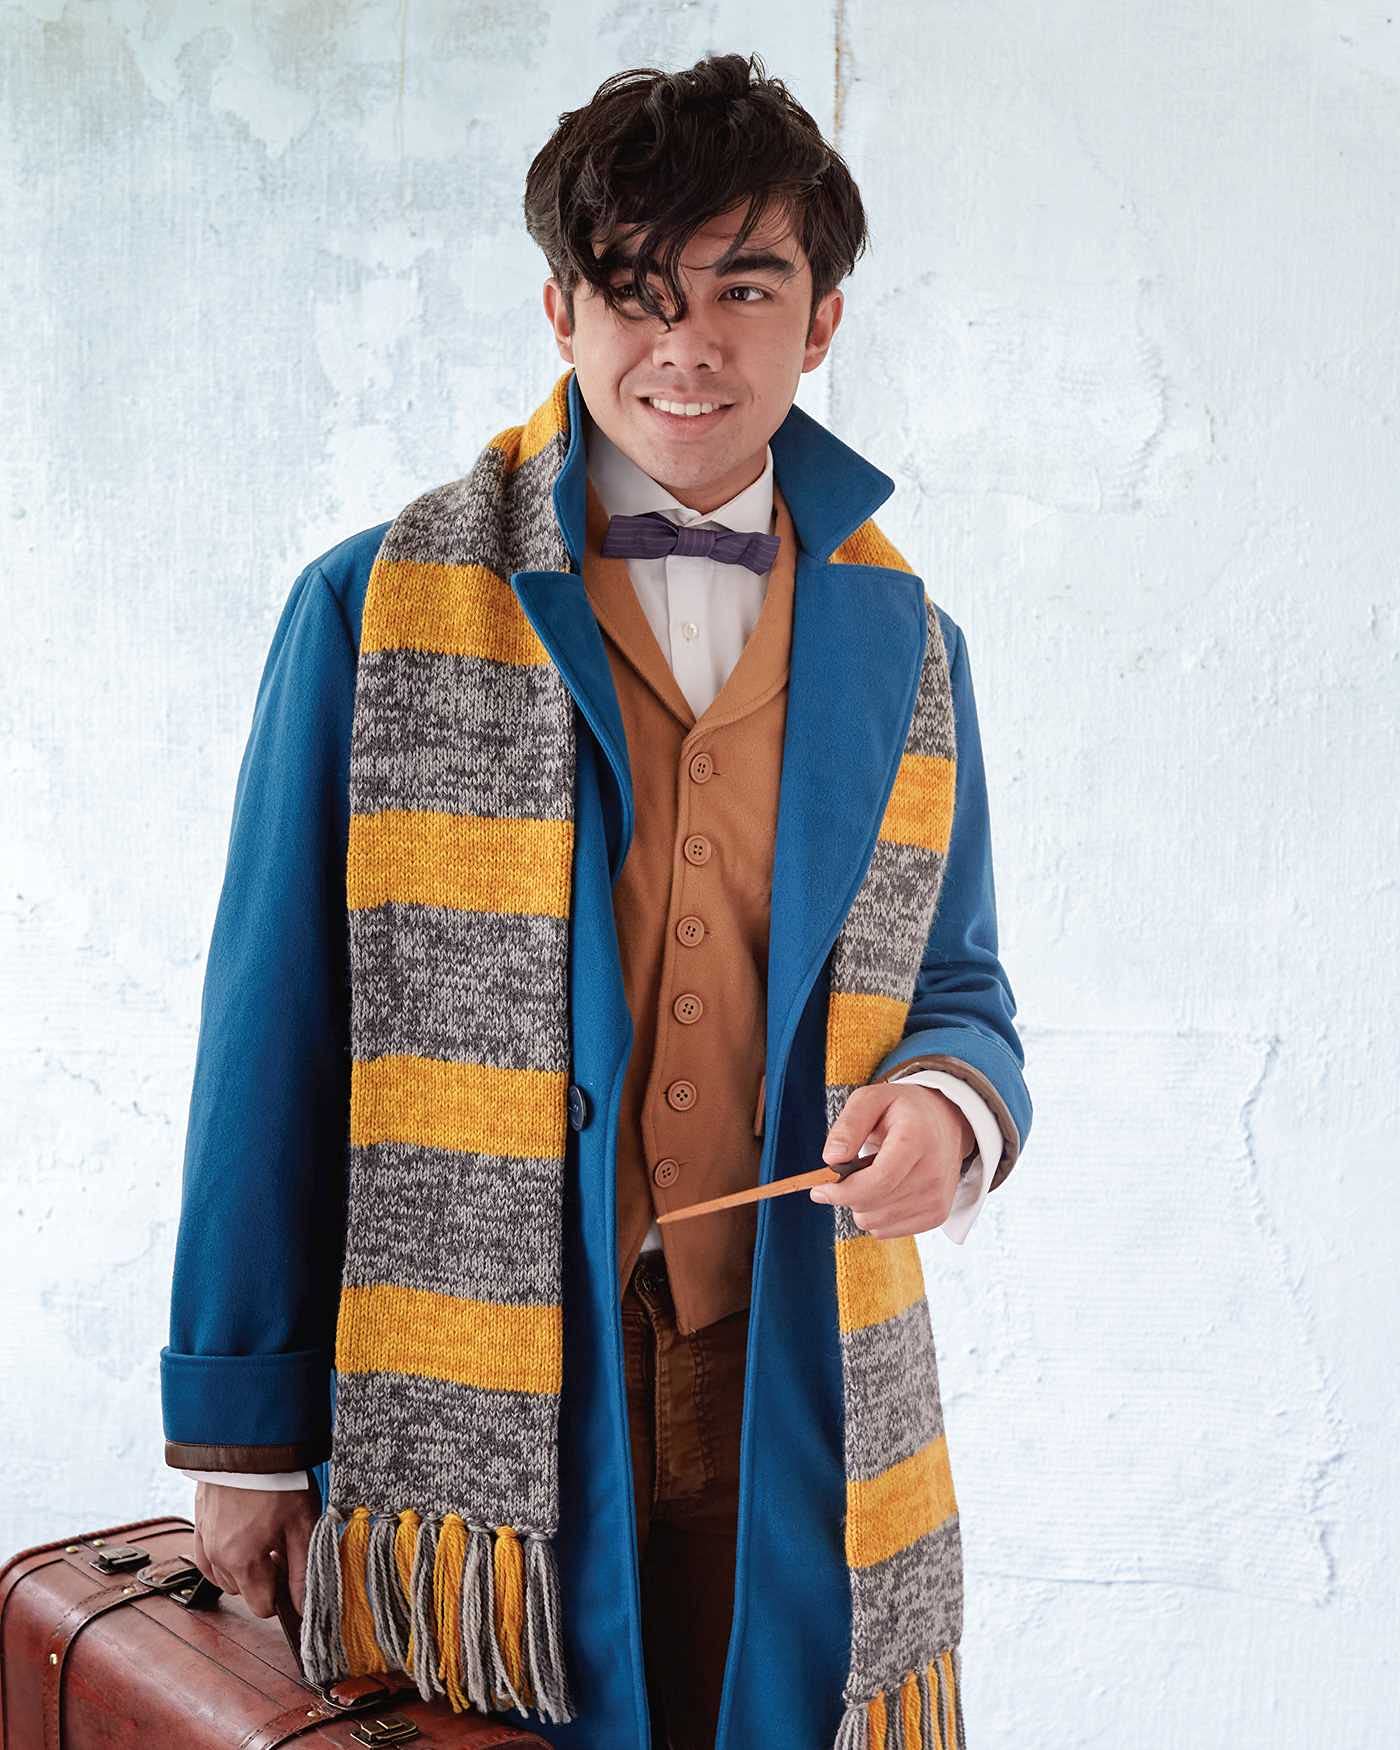 Harry Potter: More Patterns From Hogwarts and Beyond: An Official Harry  Potter Knitting Book - The Yarn Patch